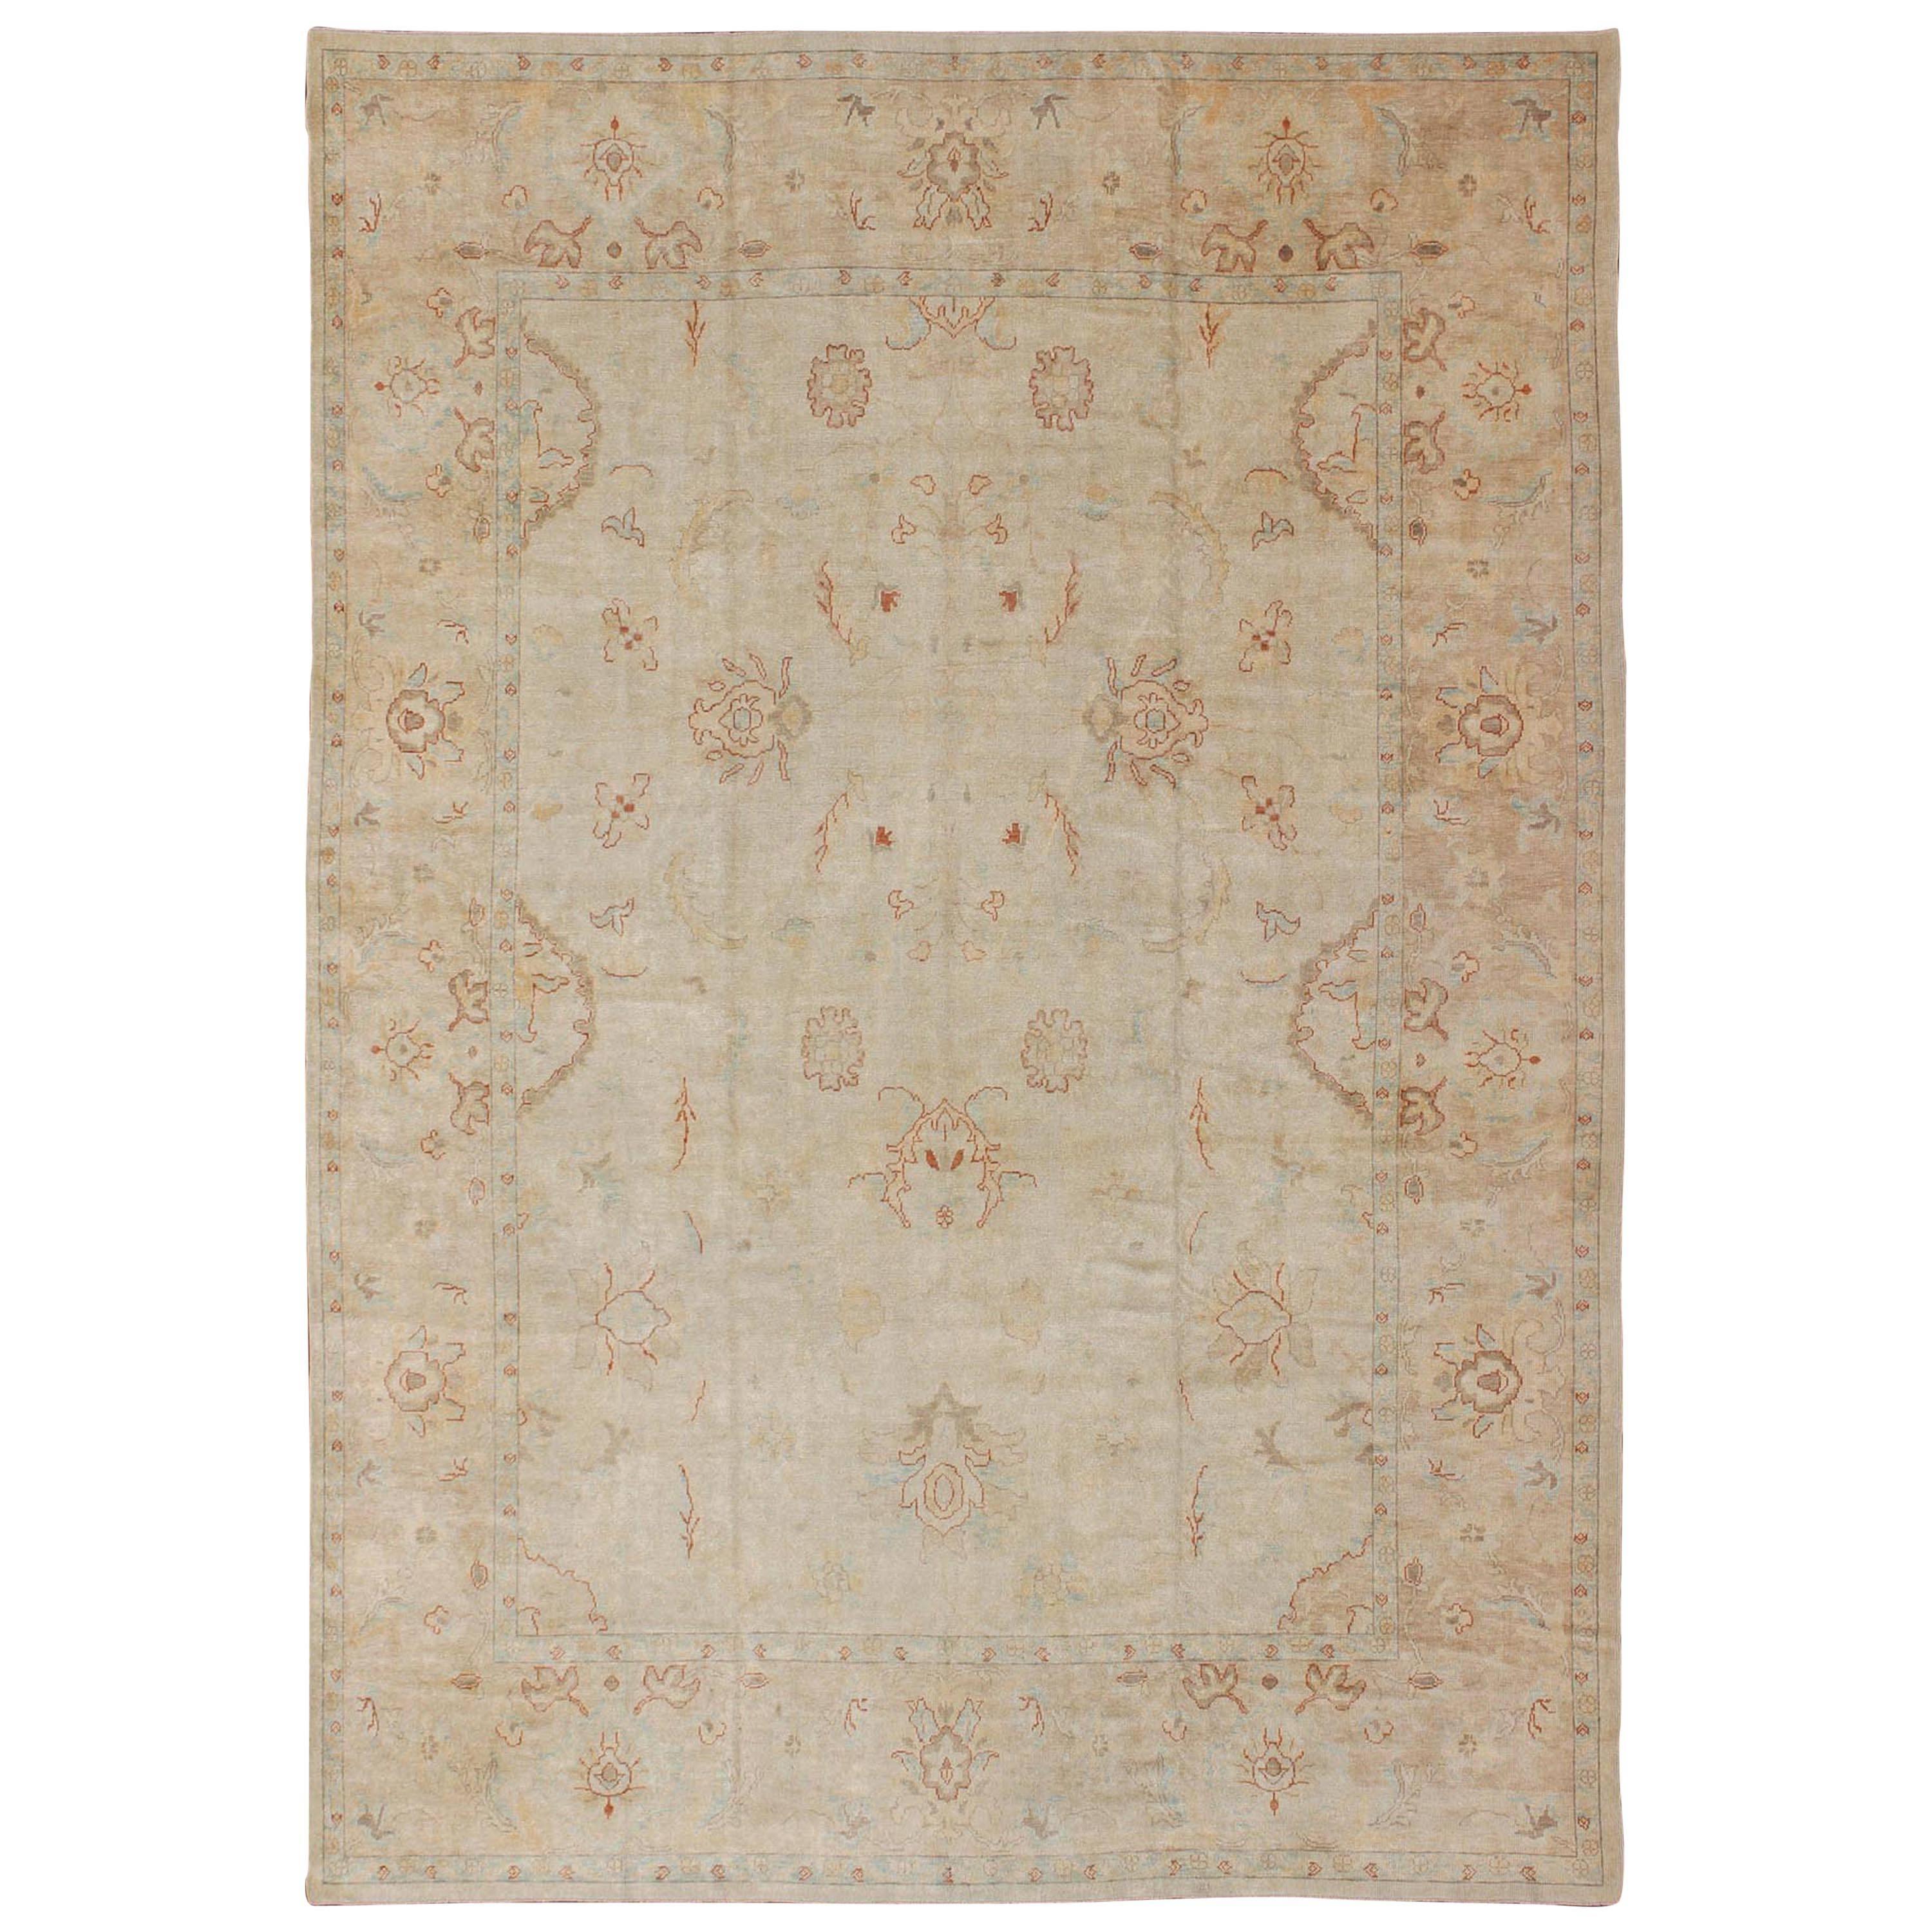 Large Turkish Oushak Rug with Pastel Colors and All-Over Floral Design For Sale